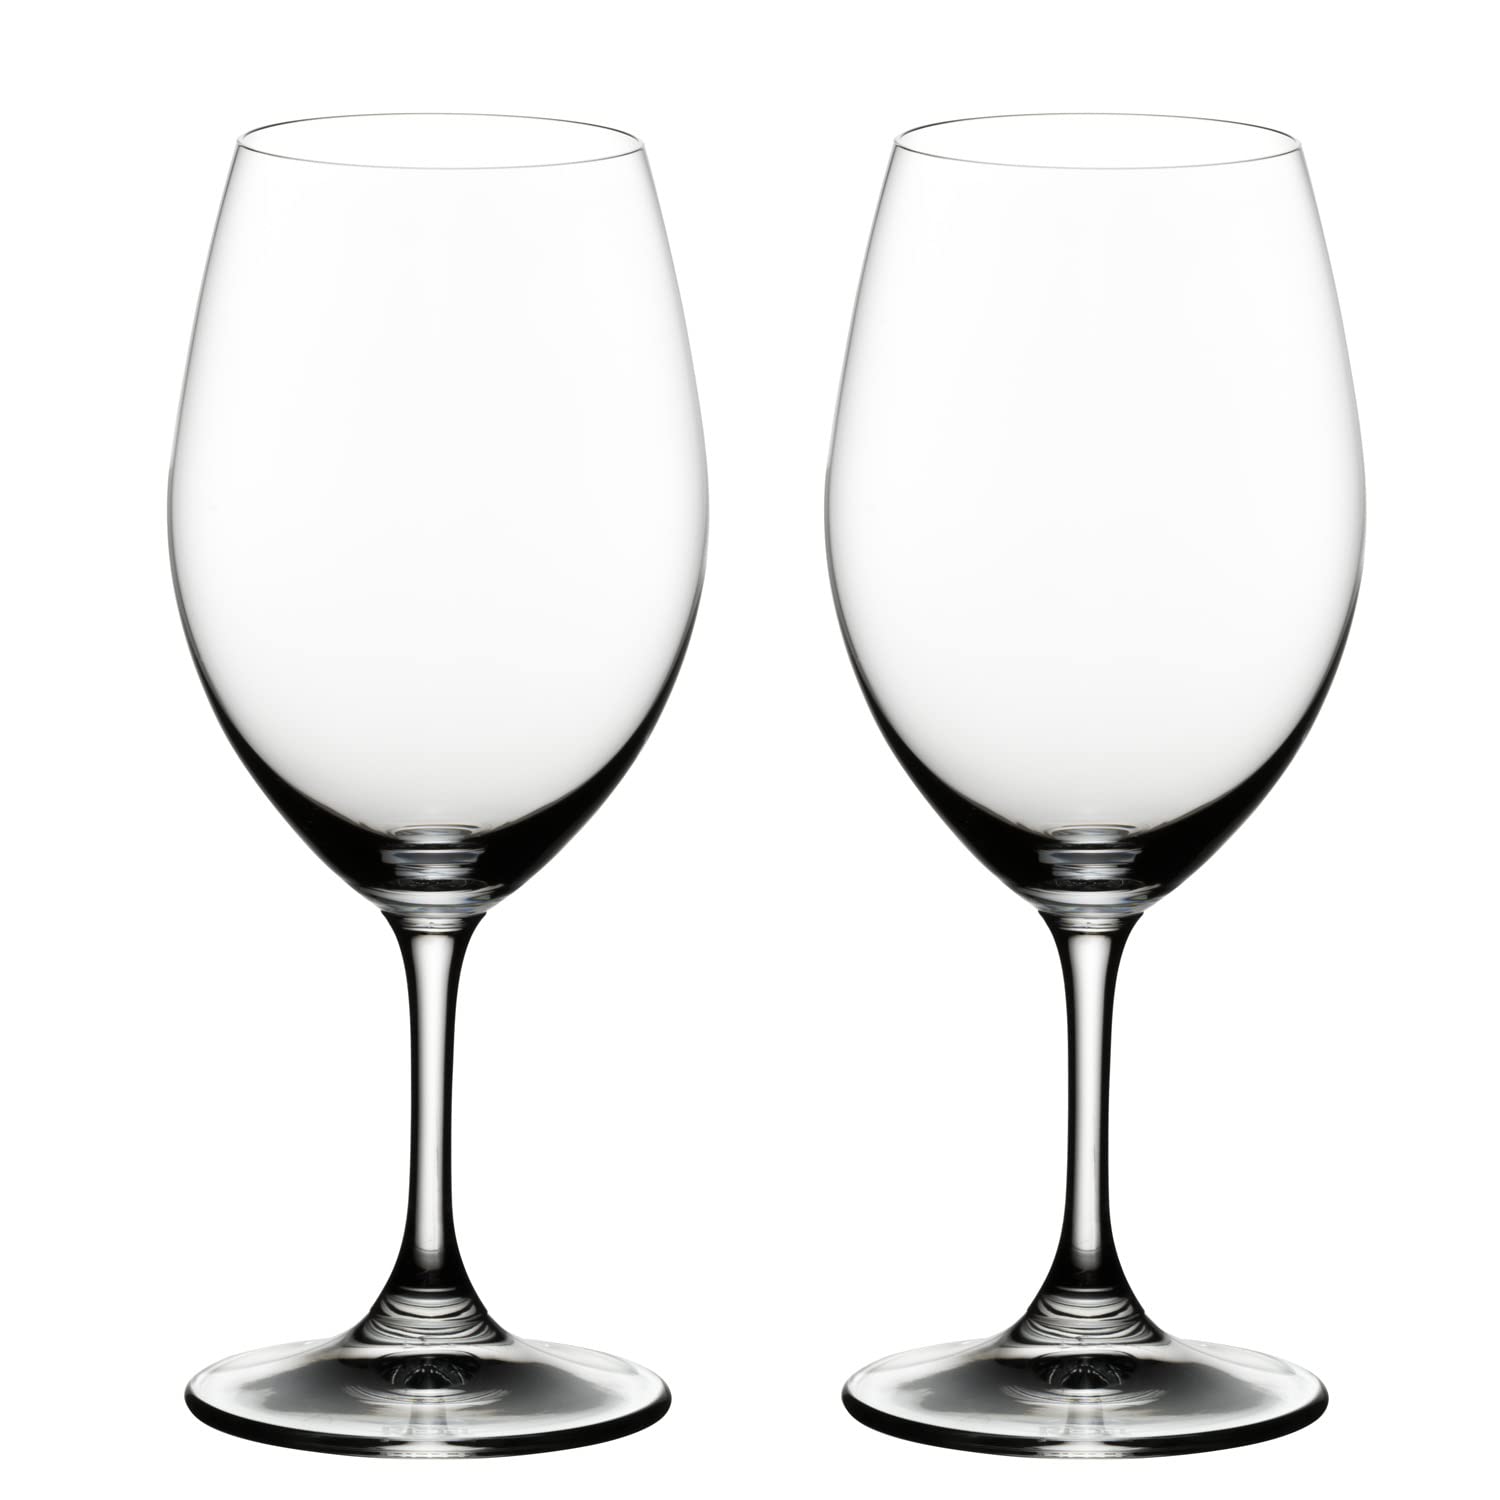 Riedel Ouverture Red Wine Glasses, Set of 2, 12.35Fl oz